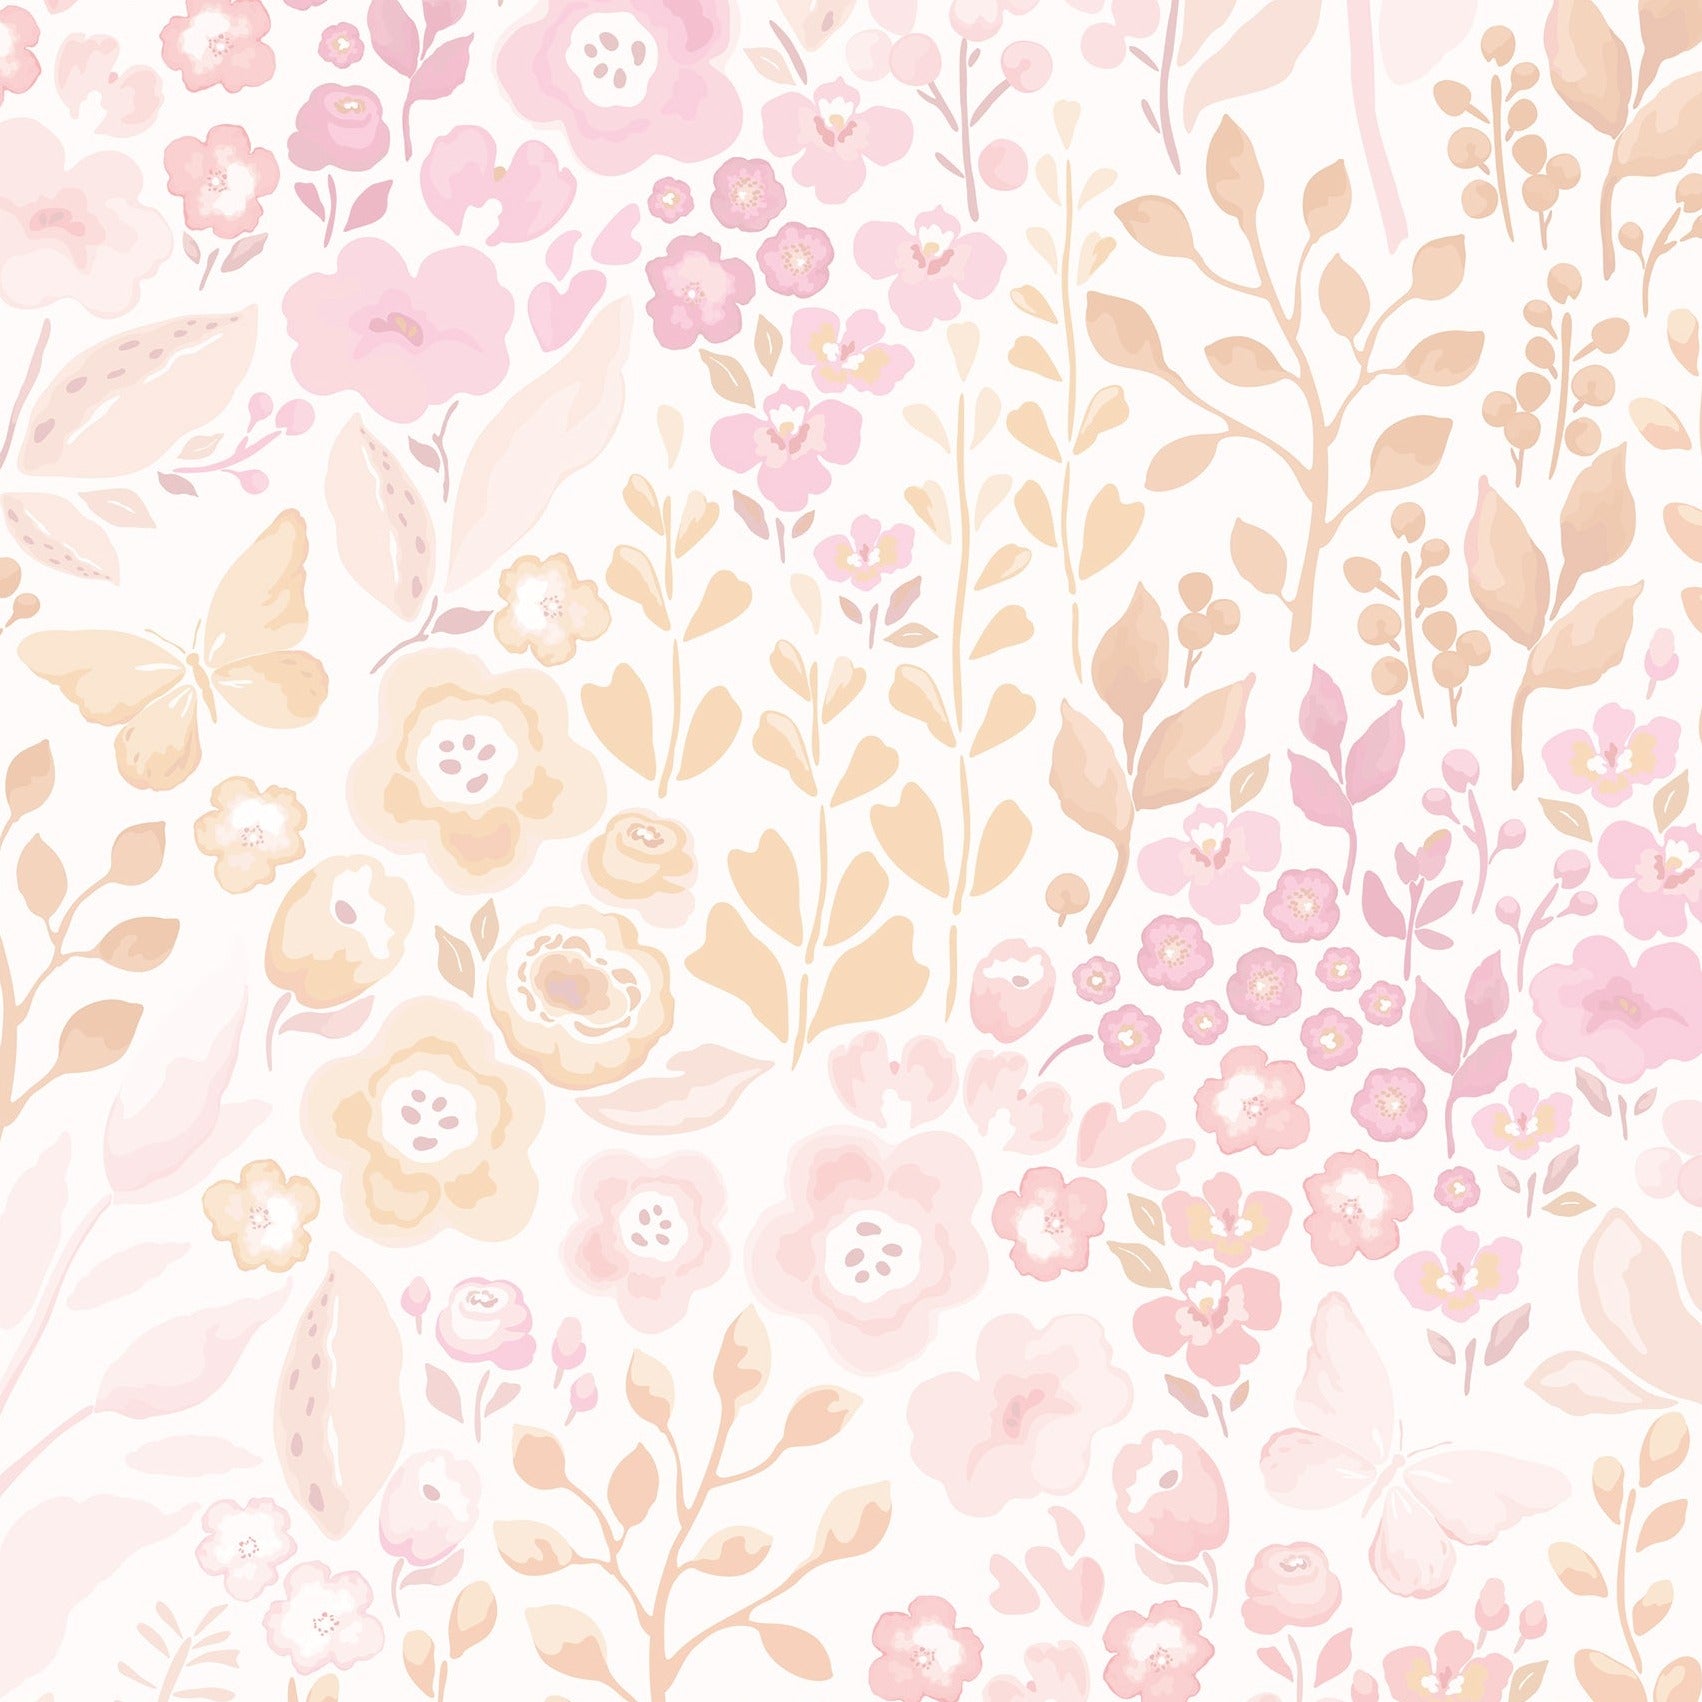 Close-up view of the 'Pretty Petals Wallpaper', showcasing the intricate details of its pastel floral pattern. The wallpaper features a variety of blooming flowers and butterflies, evoking a serene, garden-like atmosphere.